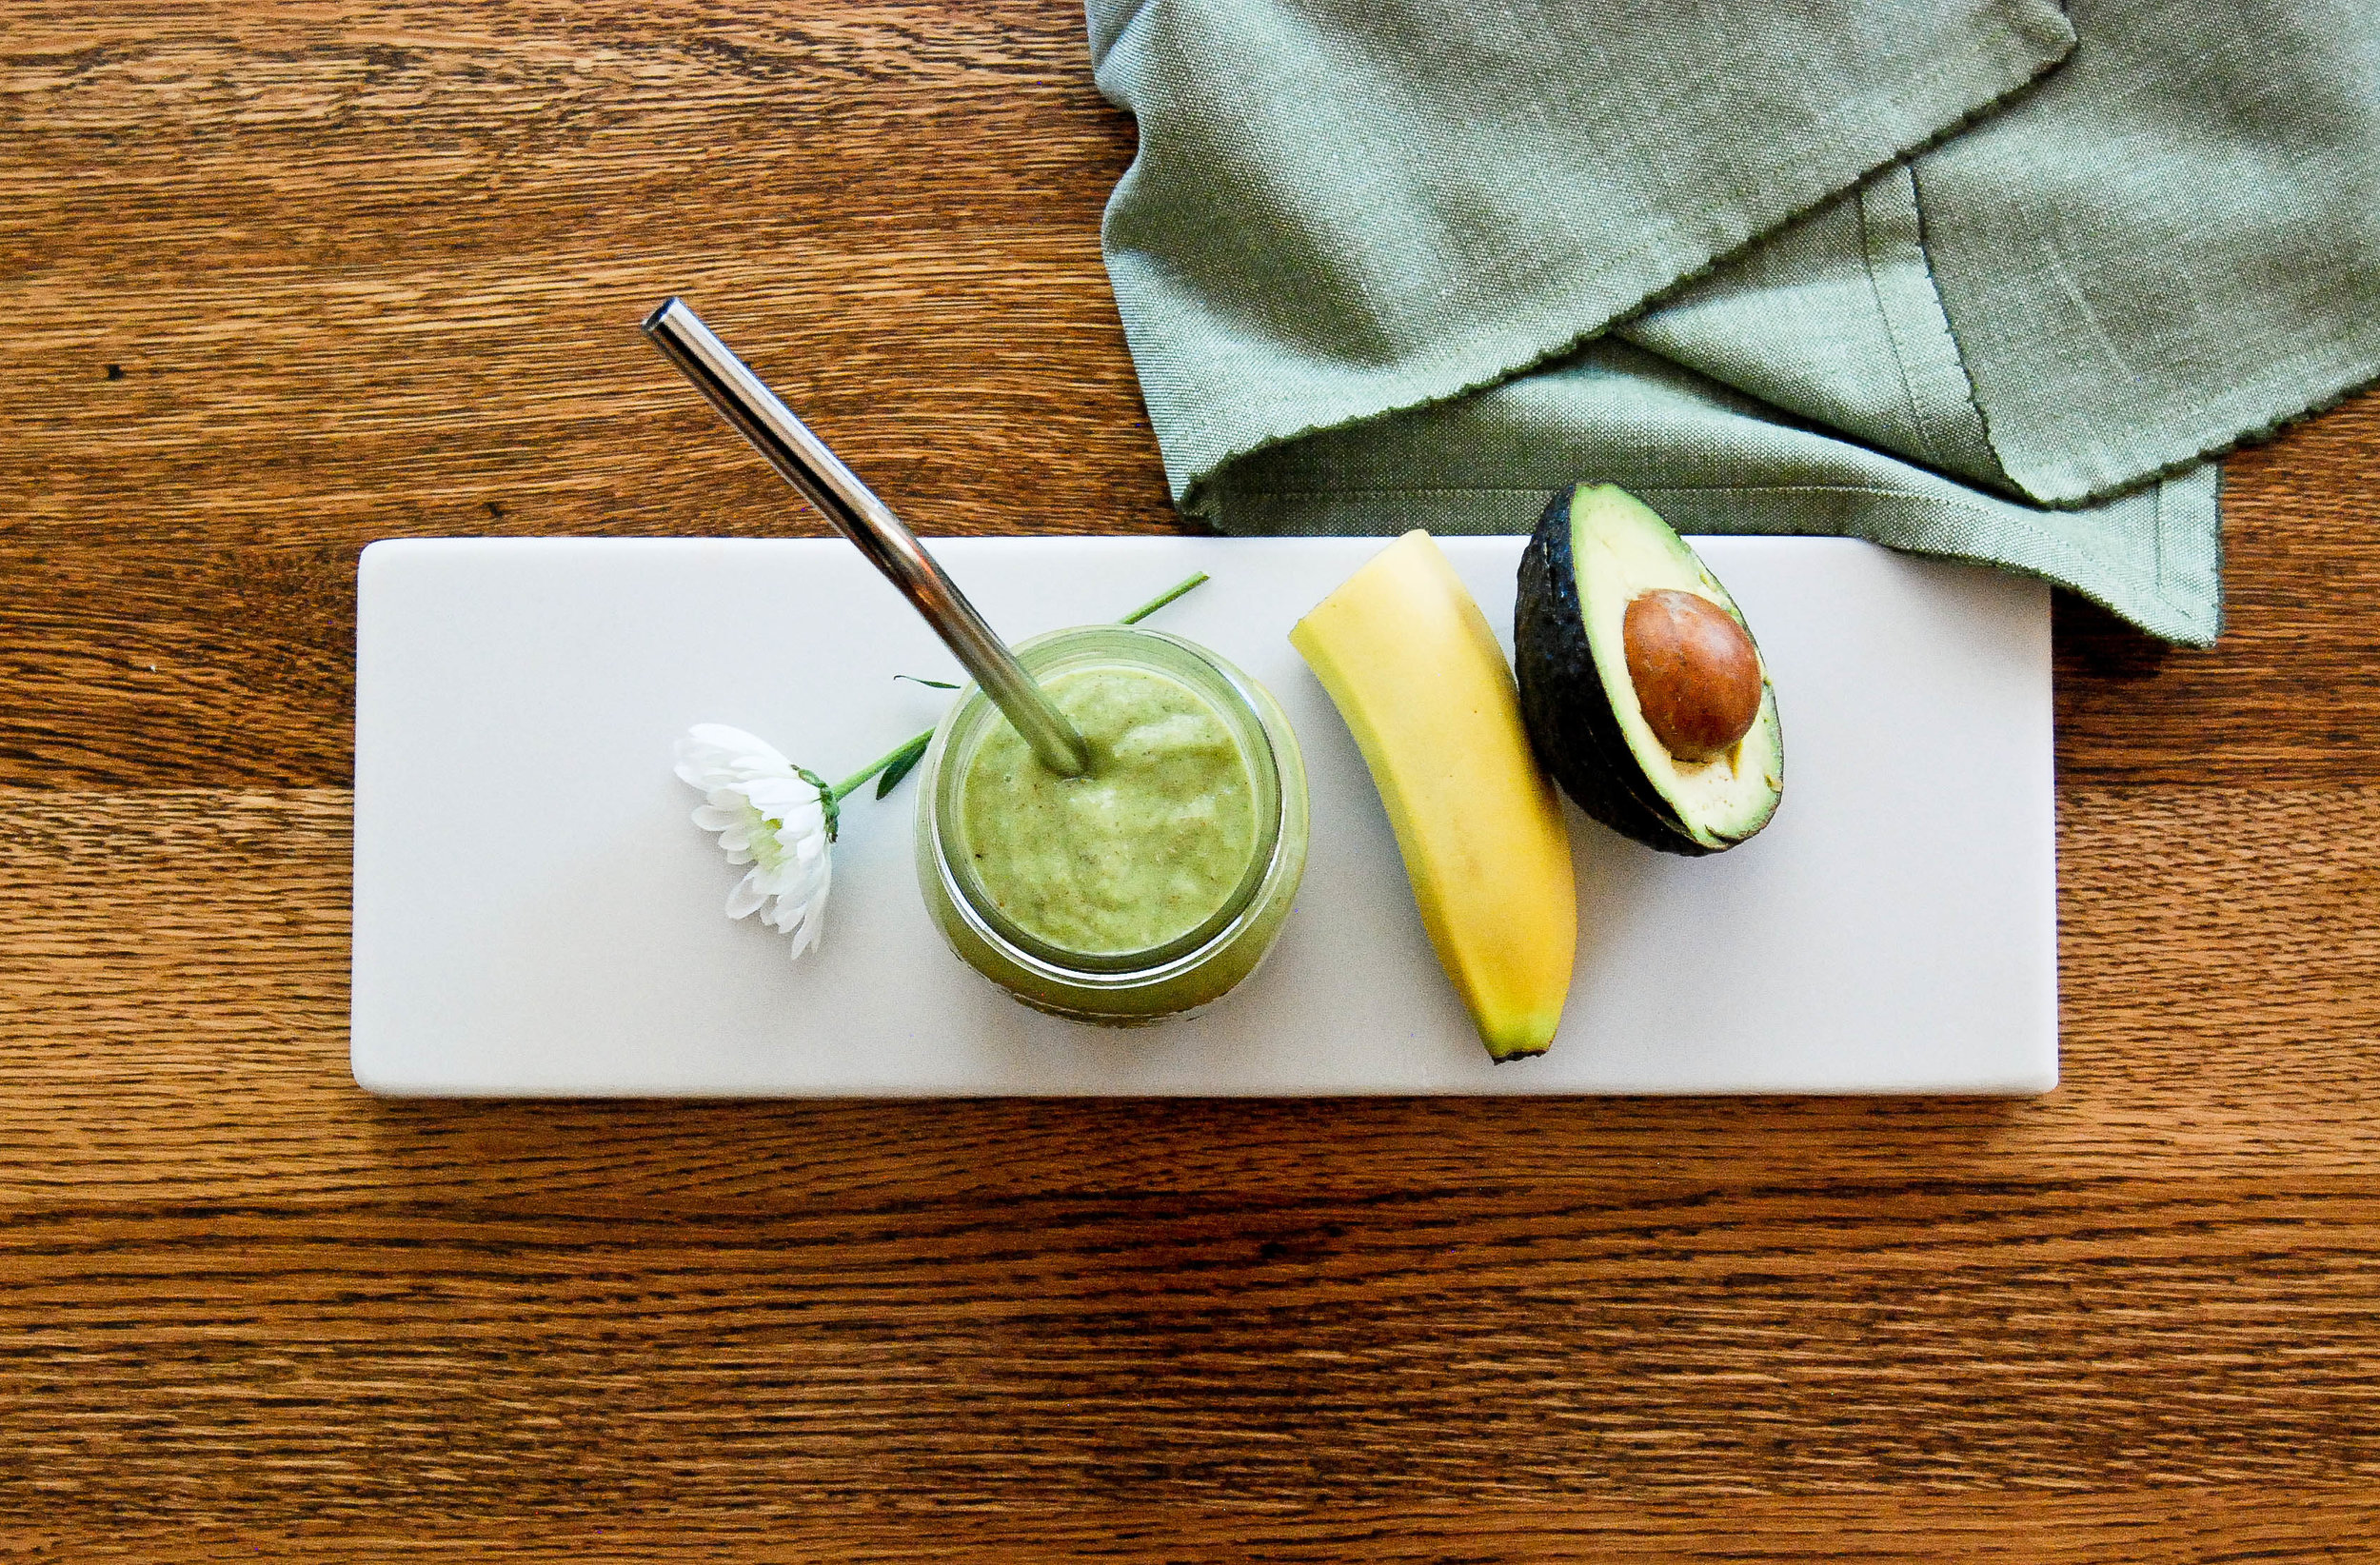 Avocado smoothie on cutting board with banana and avocado.